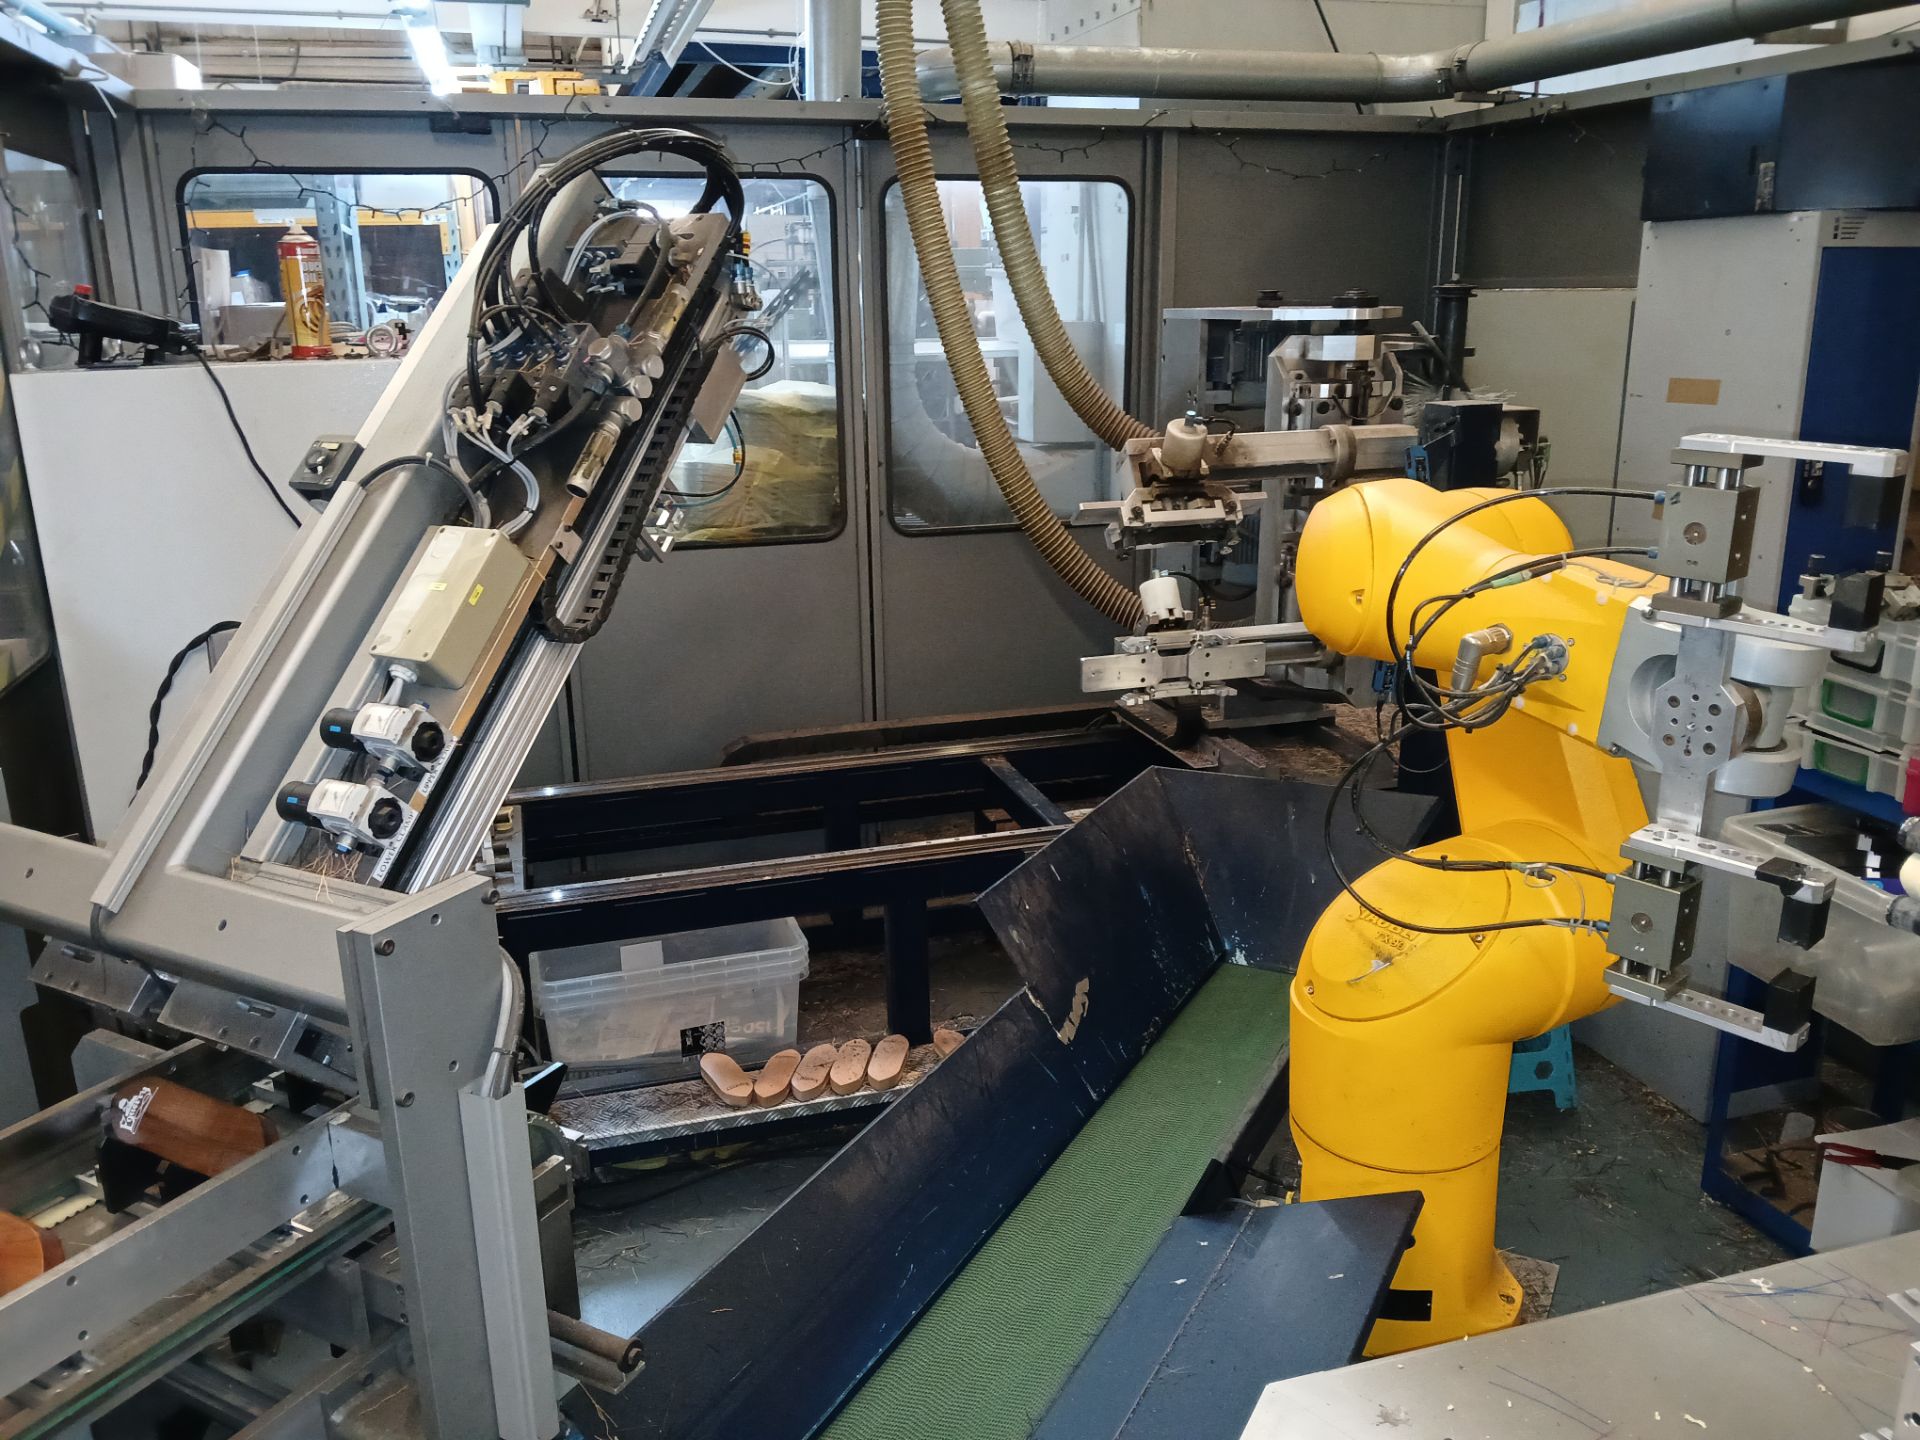 Boucherie TCU-CNC 5 axis robotic brush making machine, Serial number 1655 (2005) with Staubli TX90 - Image 2 of 23